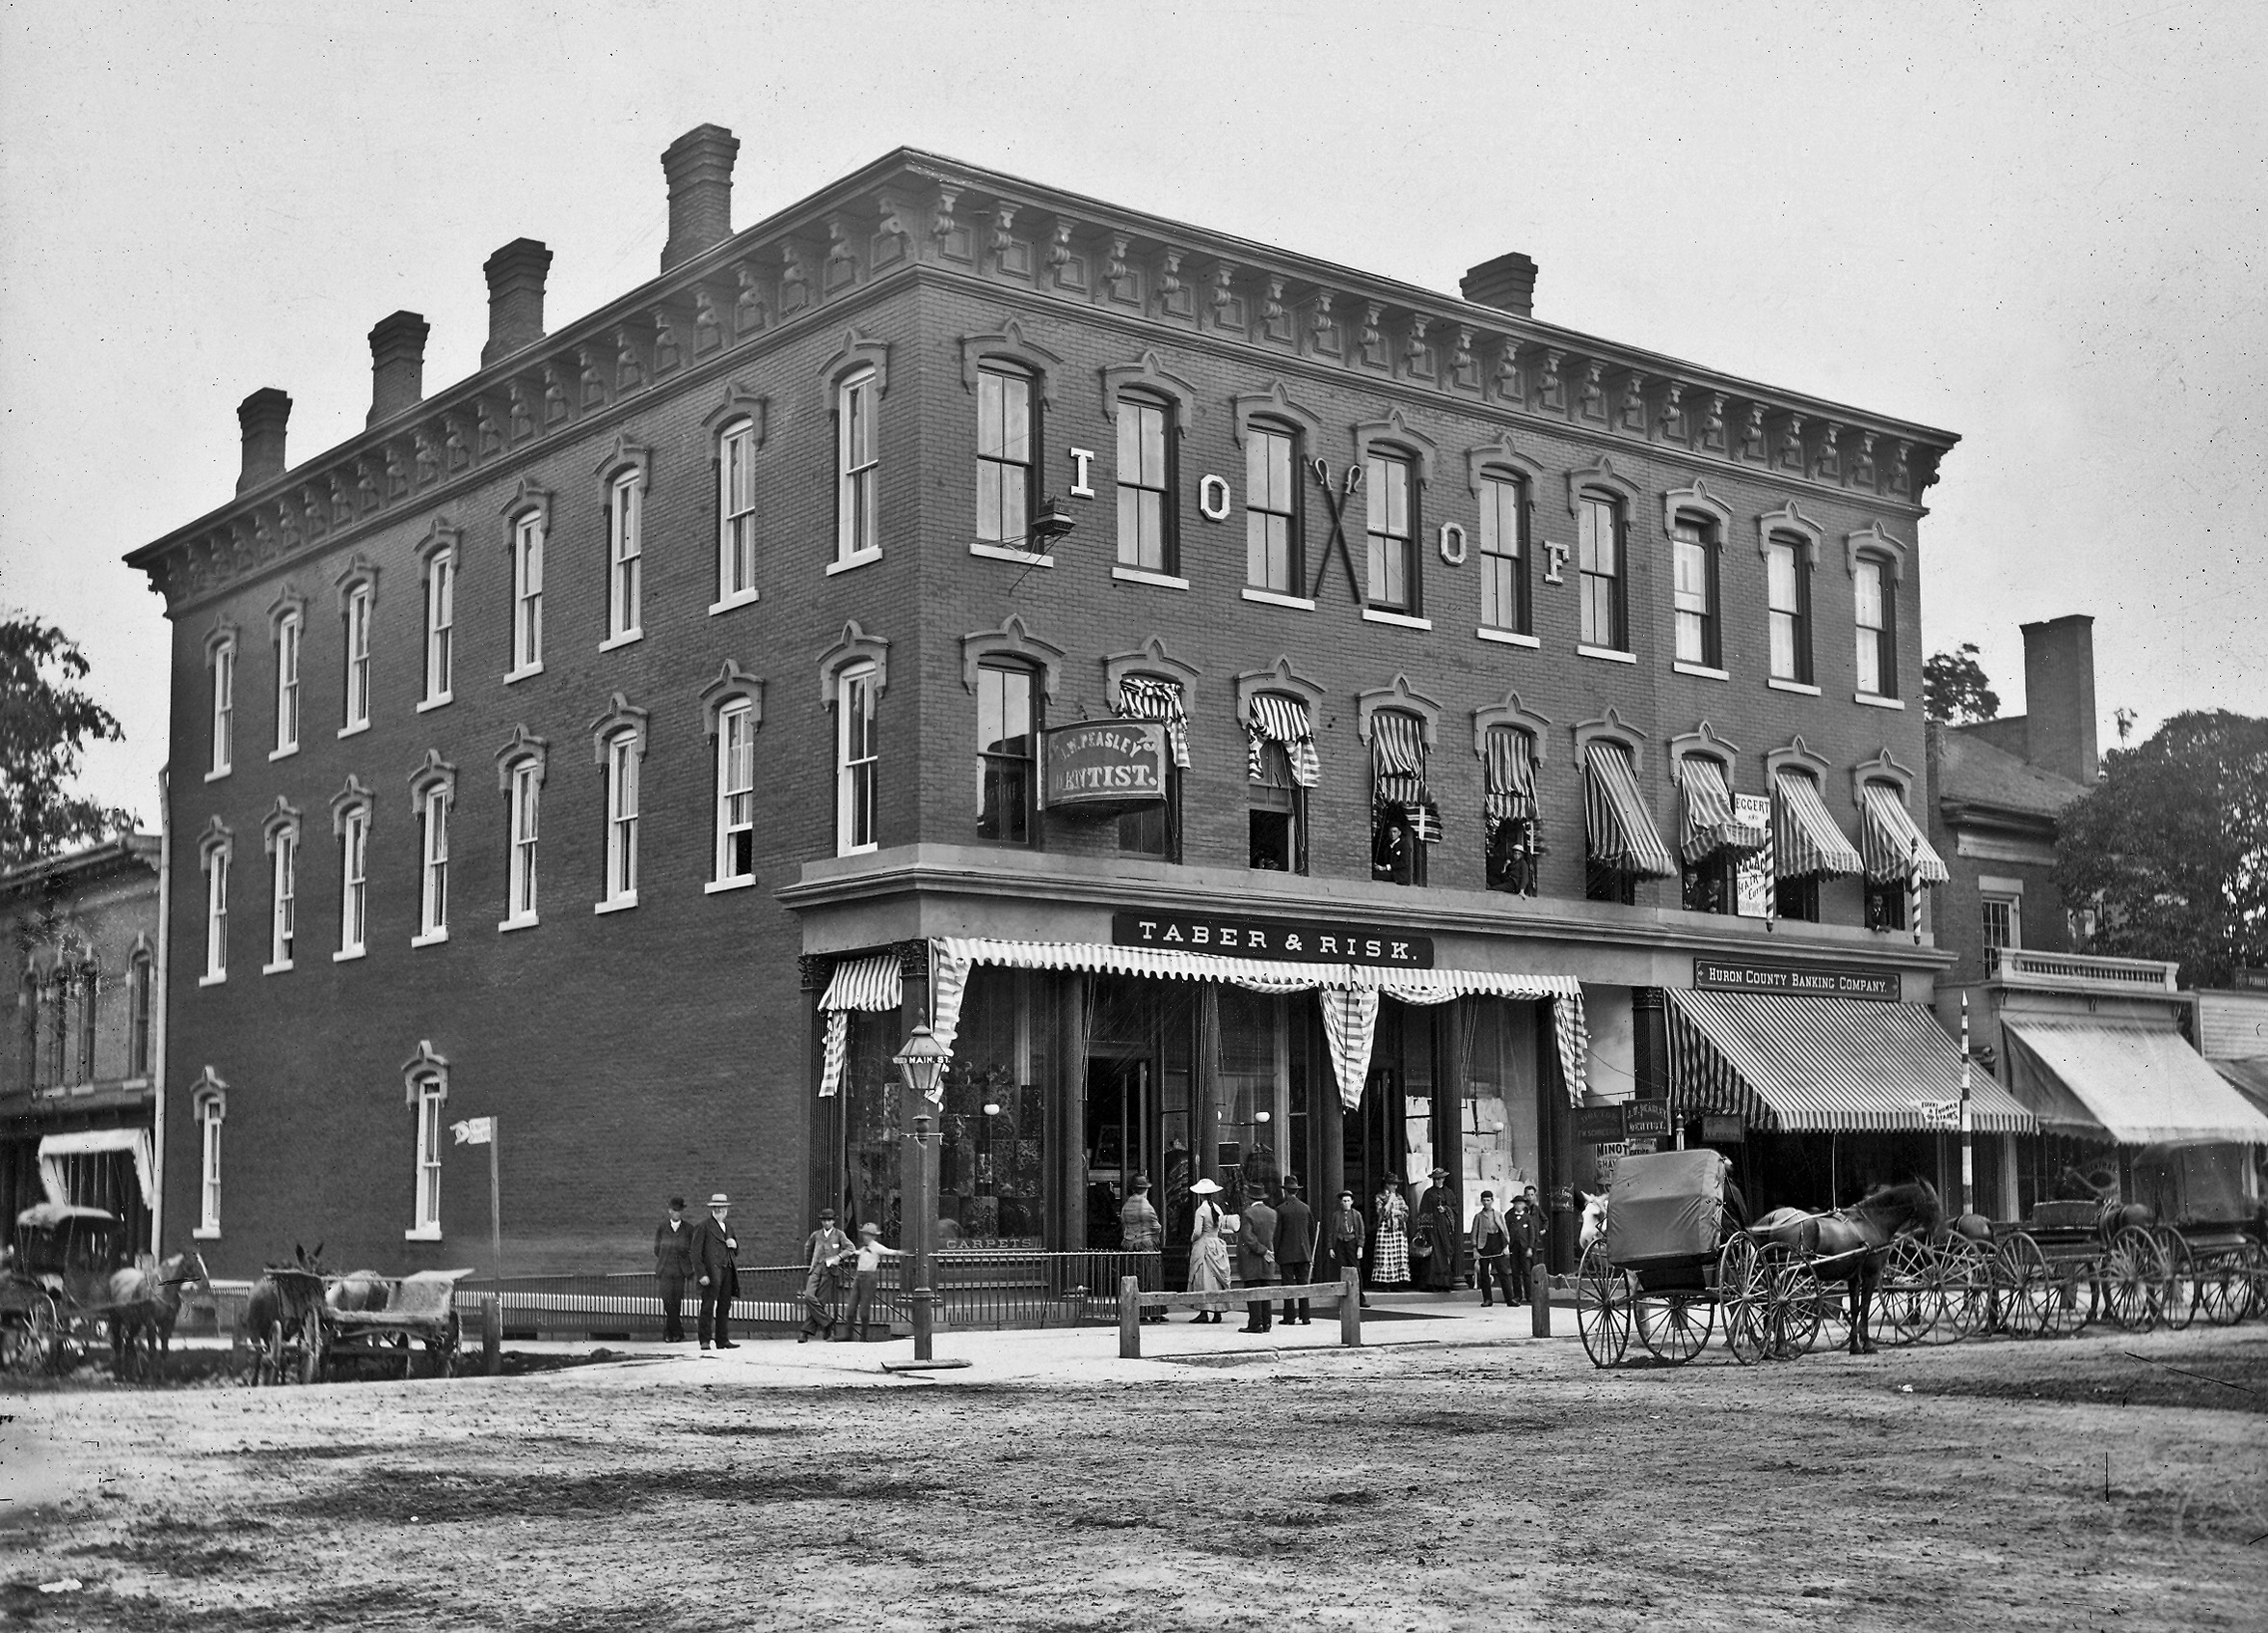 Taber & Risk department store, Norwalk Ohio, circa 1890. My grandfather would manage this store, by then called B.C. Taber, during the Depression. He went back and found photos of the store nearly to its founding in the 1870s. This is one of them. View full size.